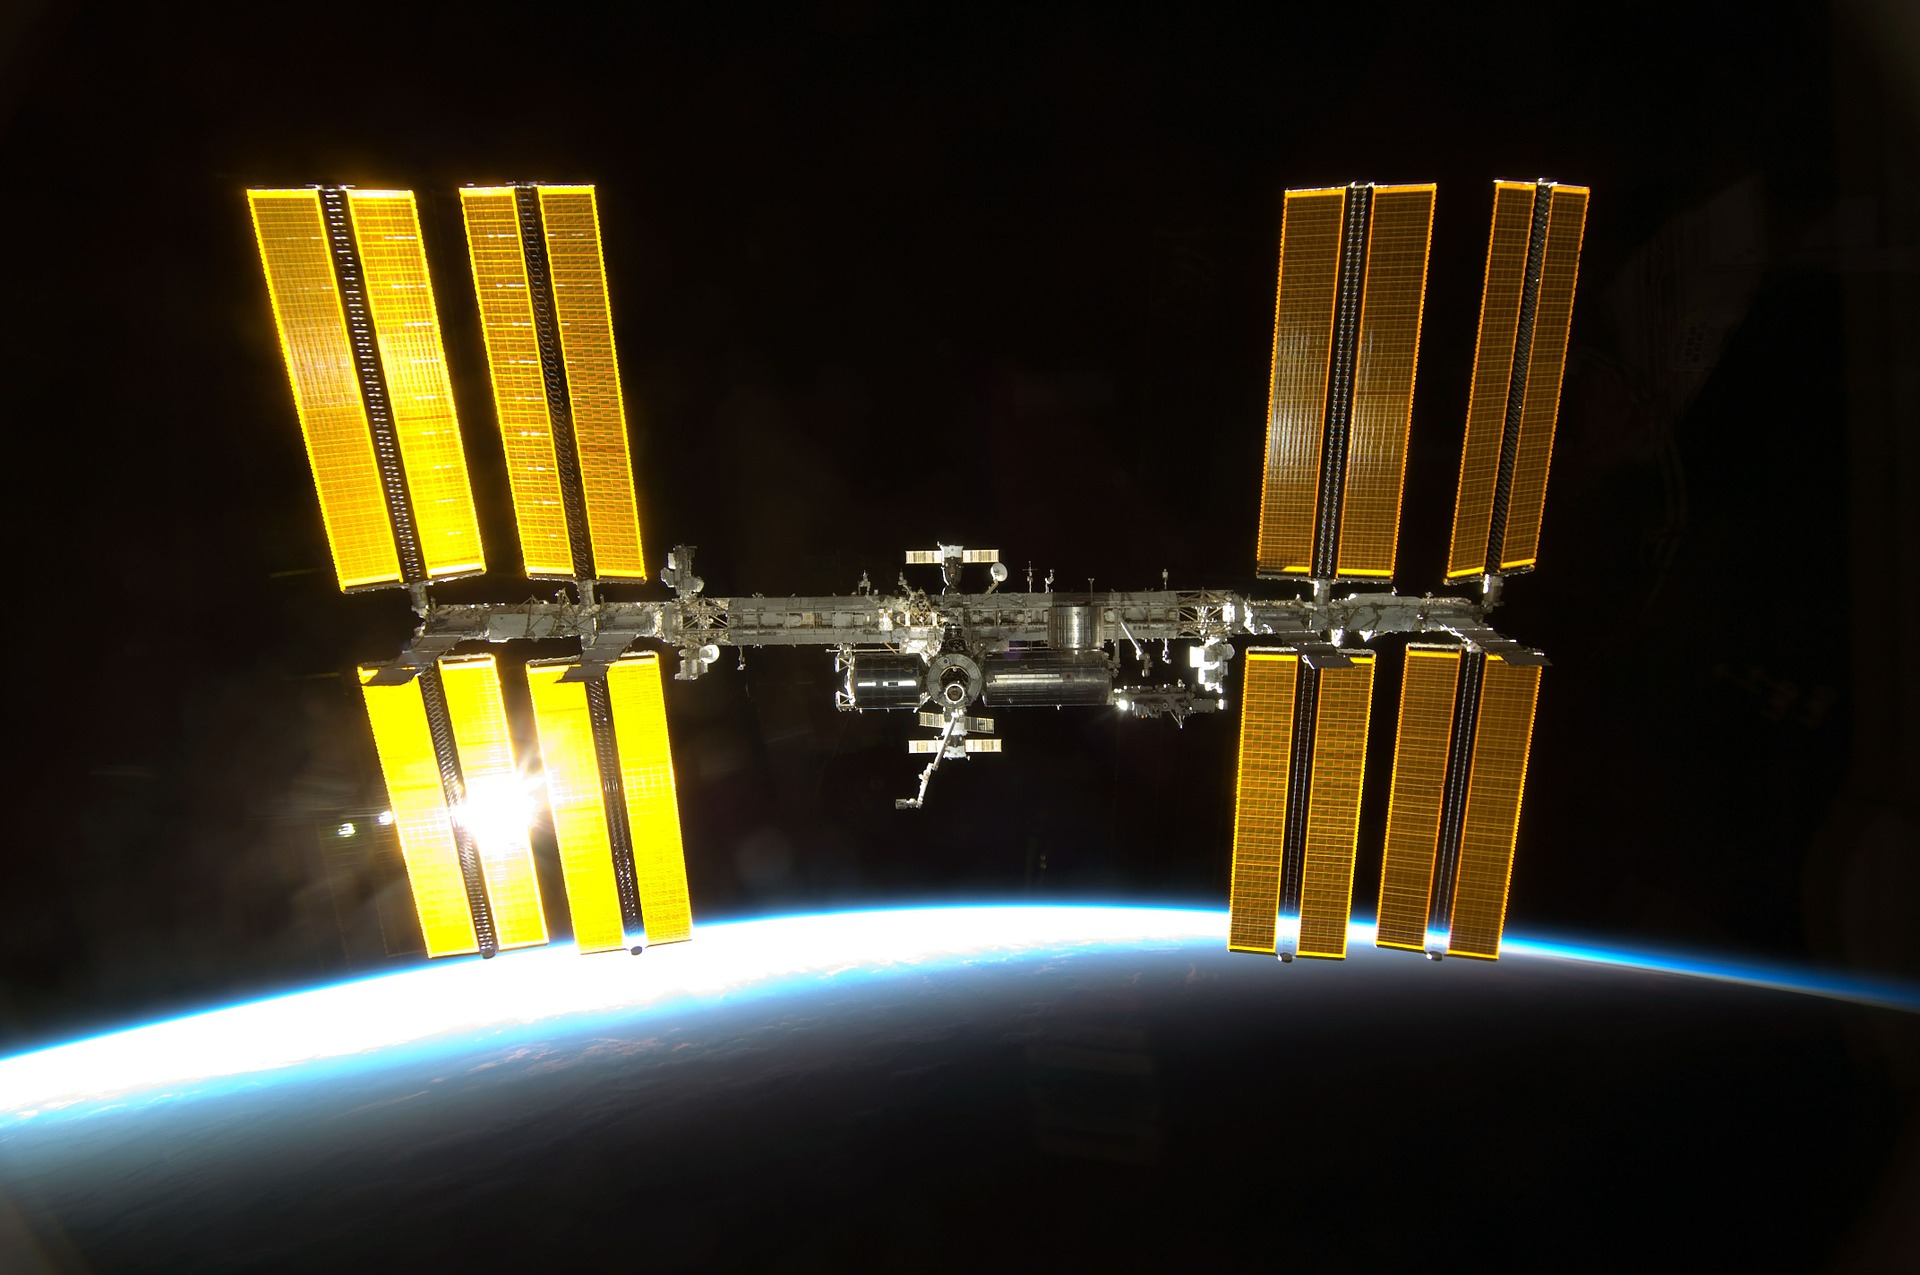 iss-600459_1920